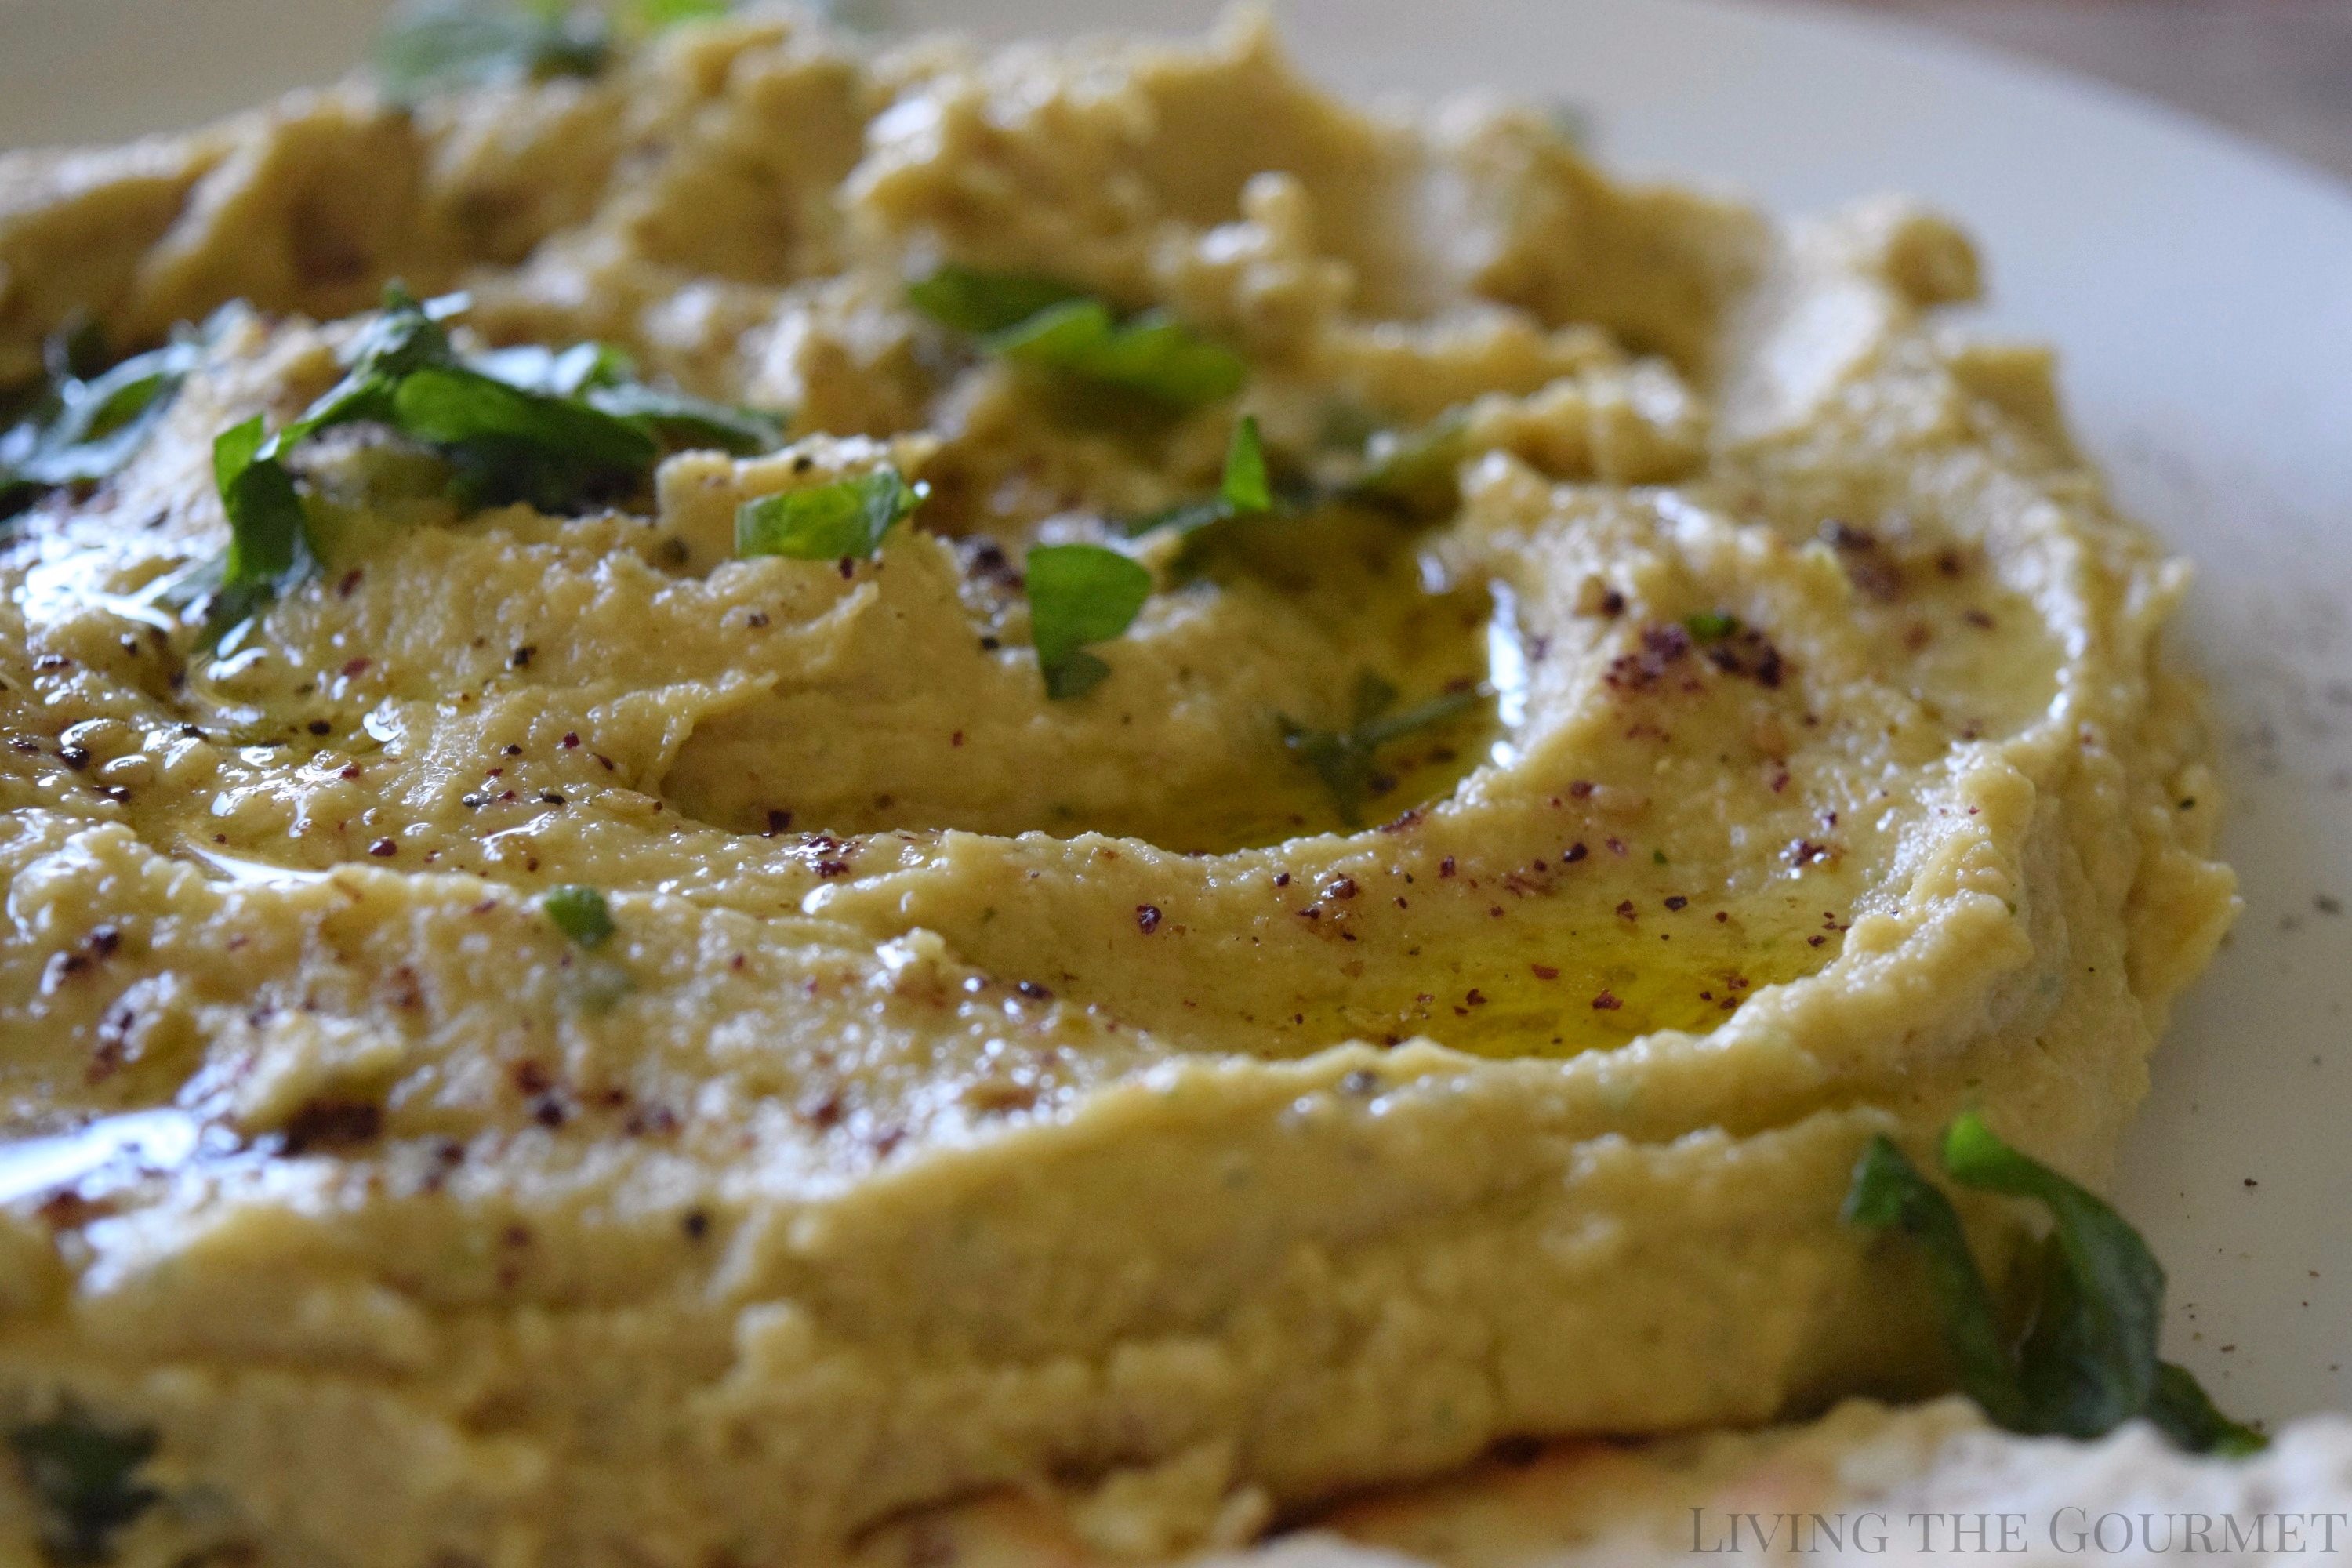 Living the Gourmet: Hummus is one of the healthiest and easiest recipes you can make. This Spicy Hummus is only a handful of ingredients away!